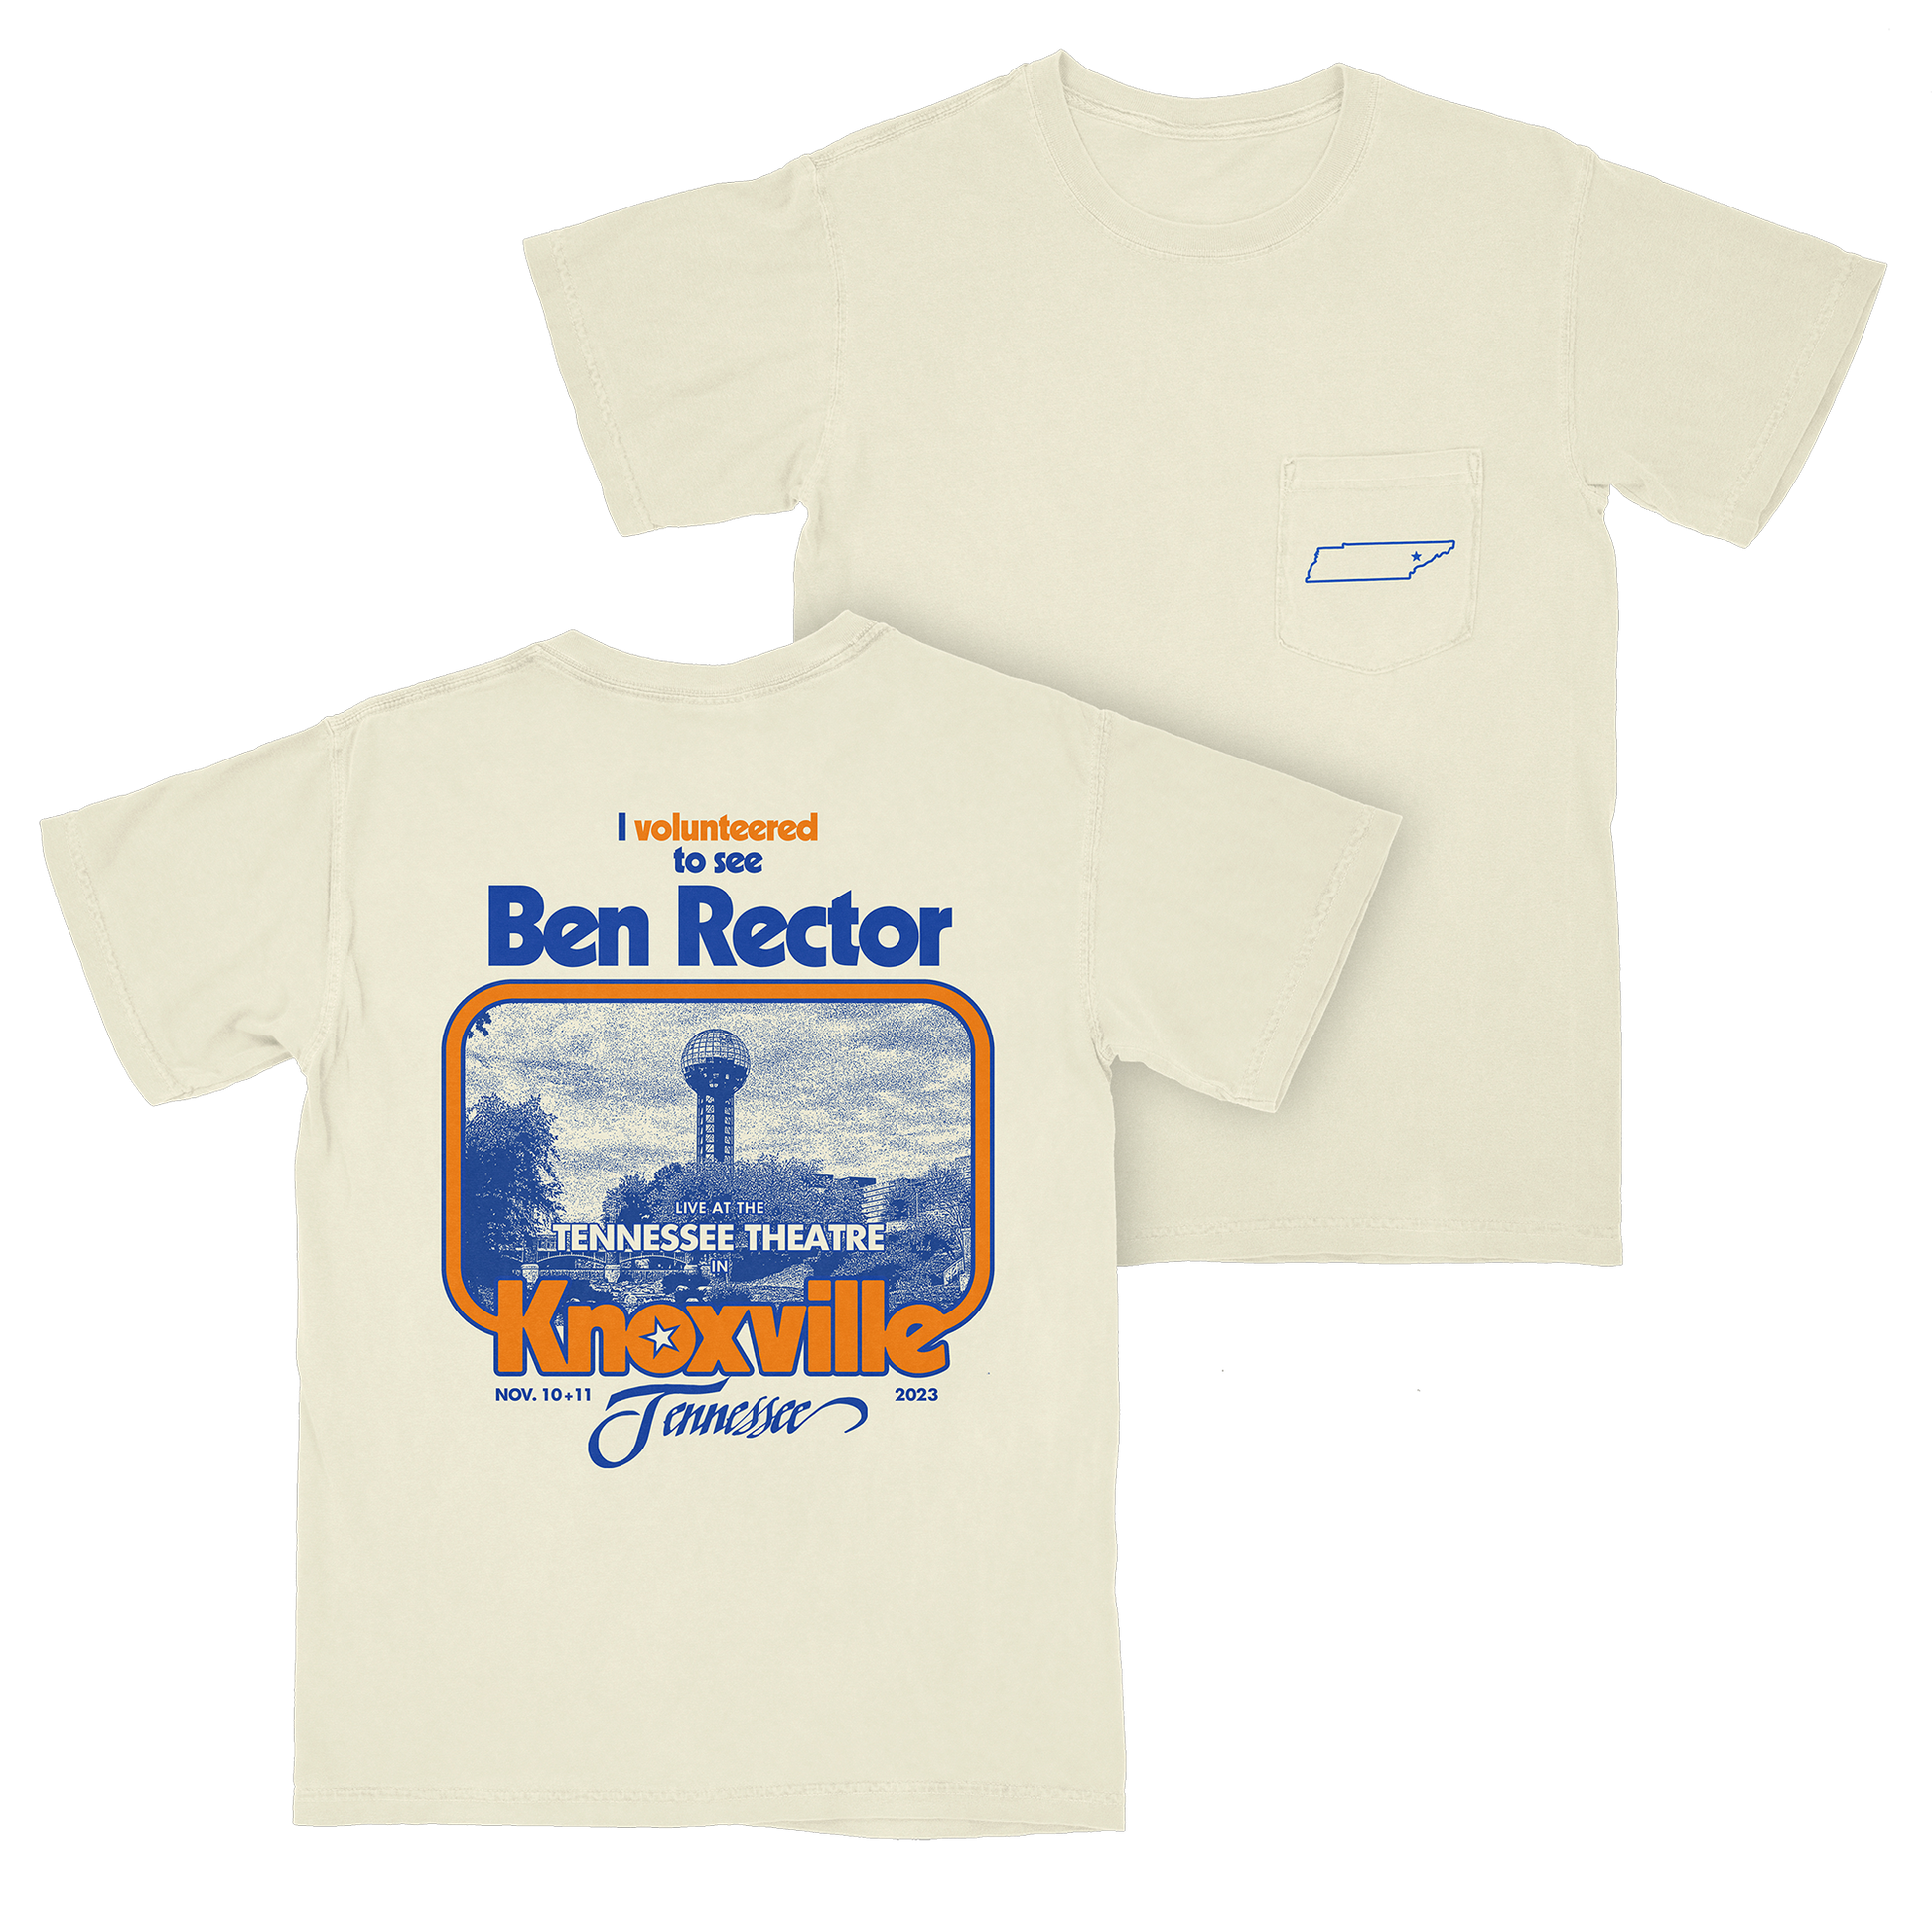 Ben Rector Tennessee Theater Tee front and back